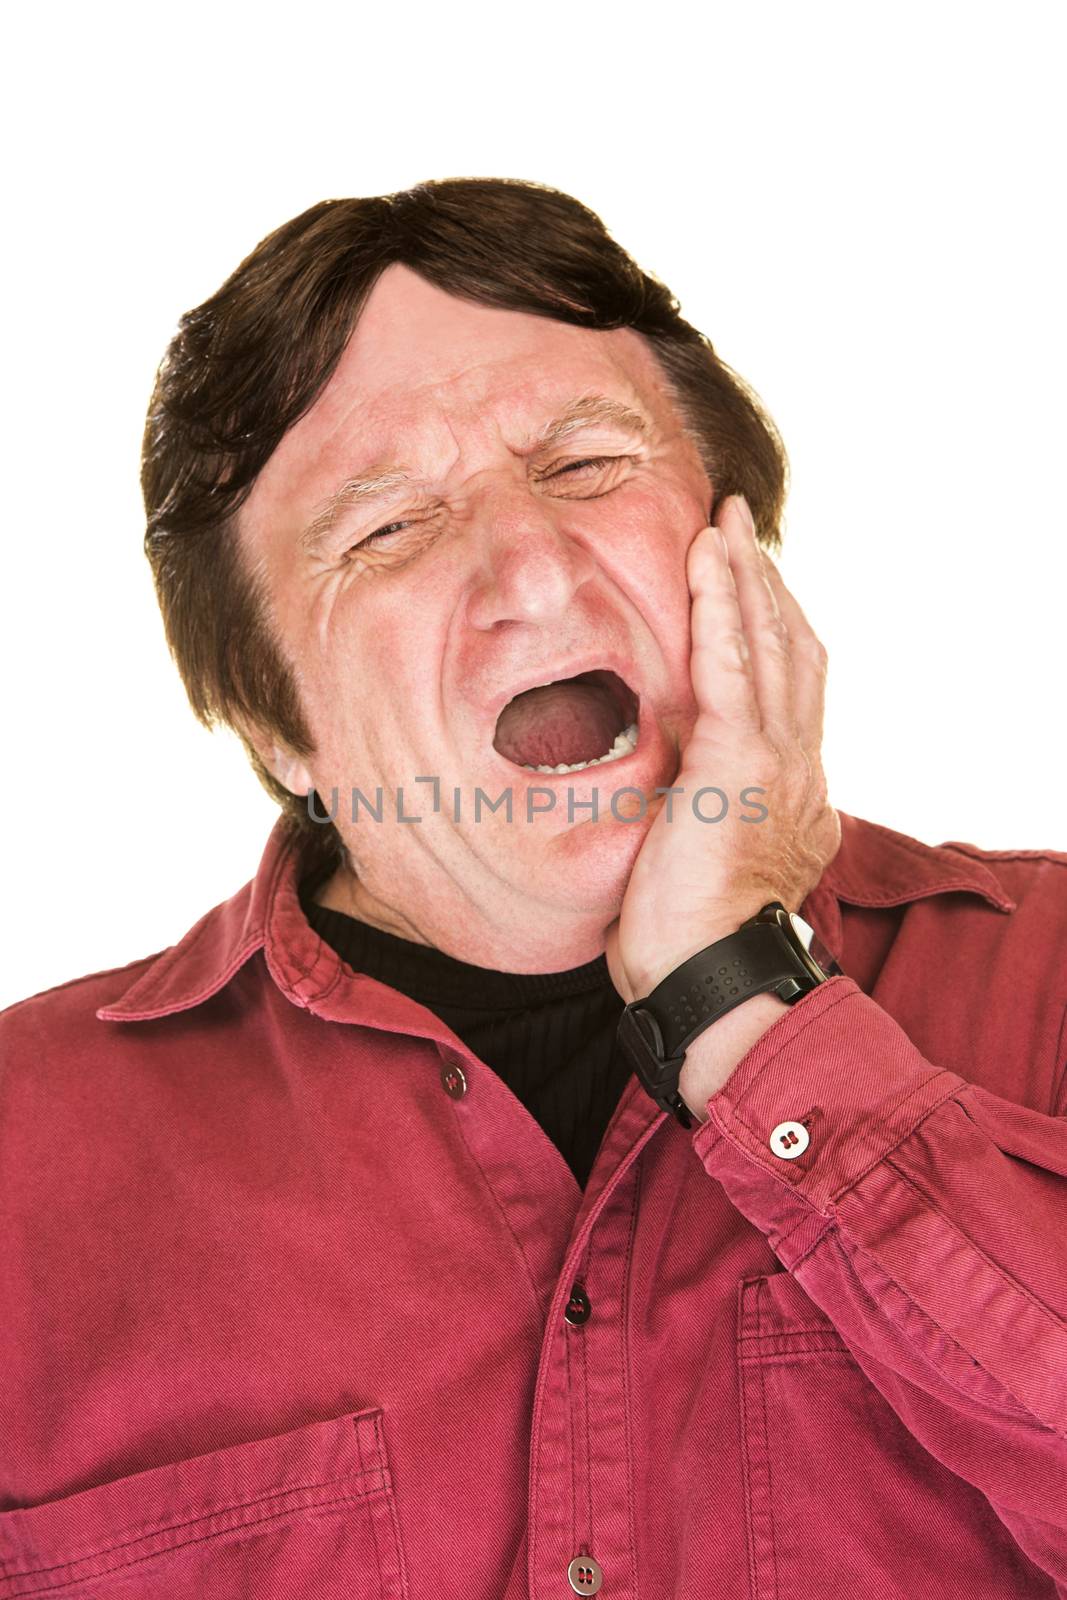 Yawning single man in red over white background